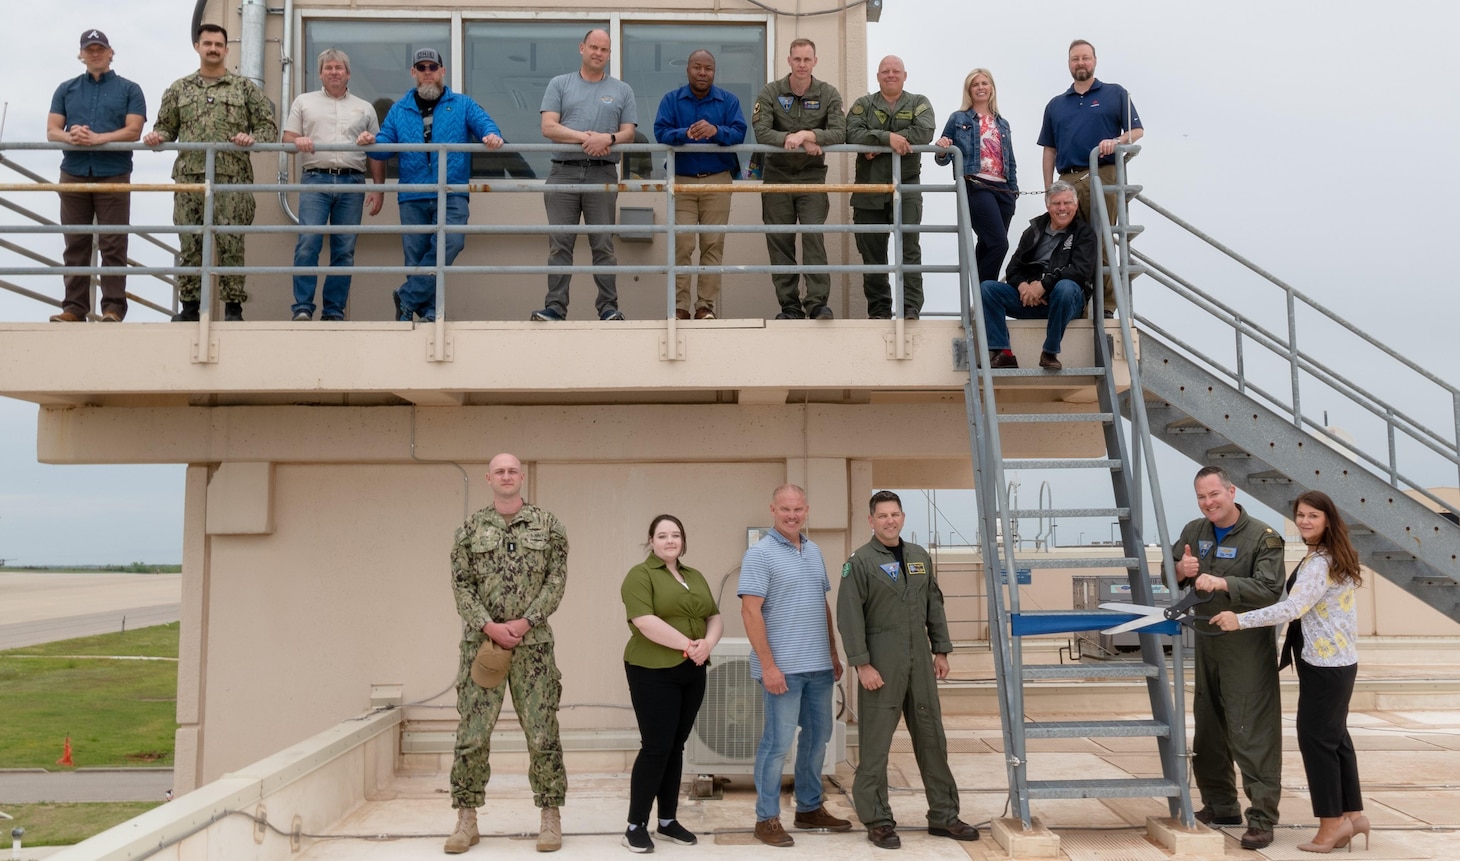 Members of the Airborne Strategic Command, Control and Communications Program Office, Strategic Communications Wing One (SCW-1), L3Harris, the Air Force Nuclear Weapons Center and the “Take Charge and Move Out” (TACAMO) Weapons School participate in a ribbon-cutting for new communications equipment at Tinker Air Force Base, Oklahoma, on May 3. At bottom right, SCW-1 Deputy for Communications Lt. Cdr. Paul Brazier and Laura Young, then-Integrated Product Team Lead for Wideband Systems, cut the ribbon.